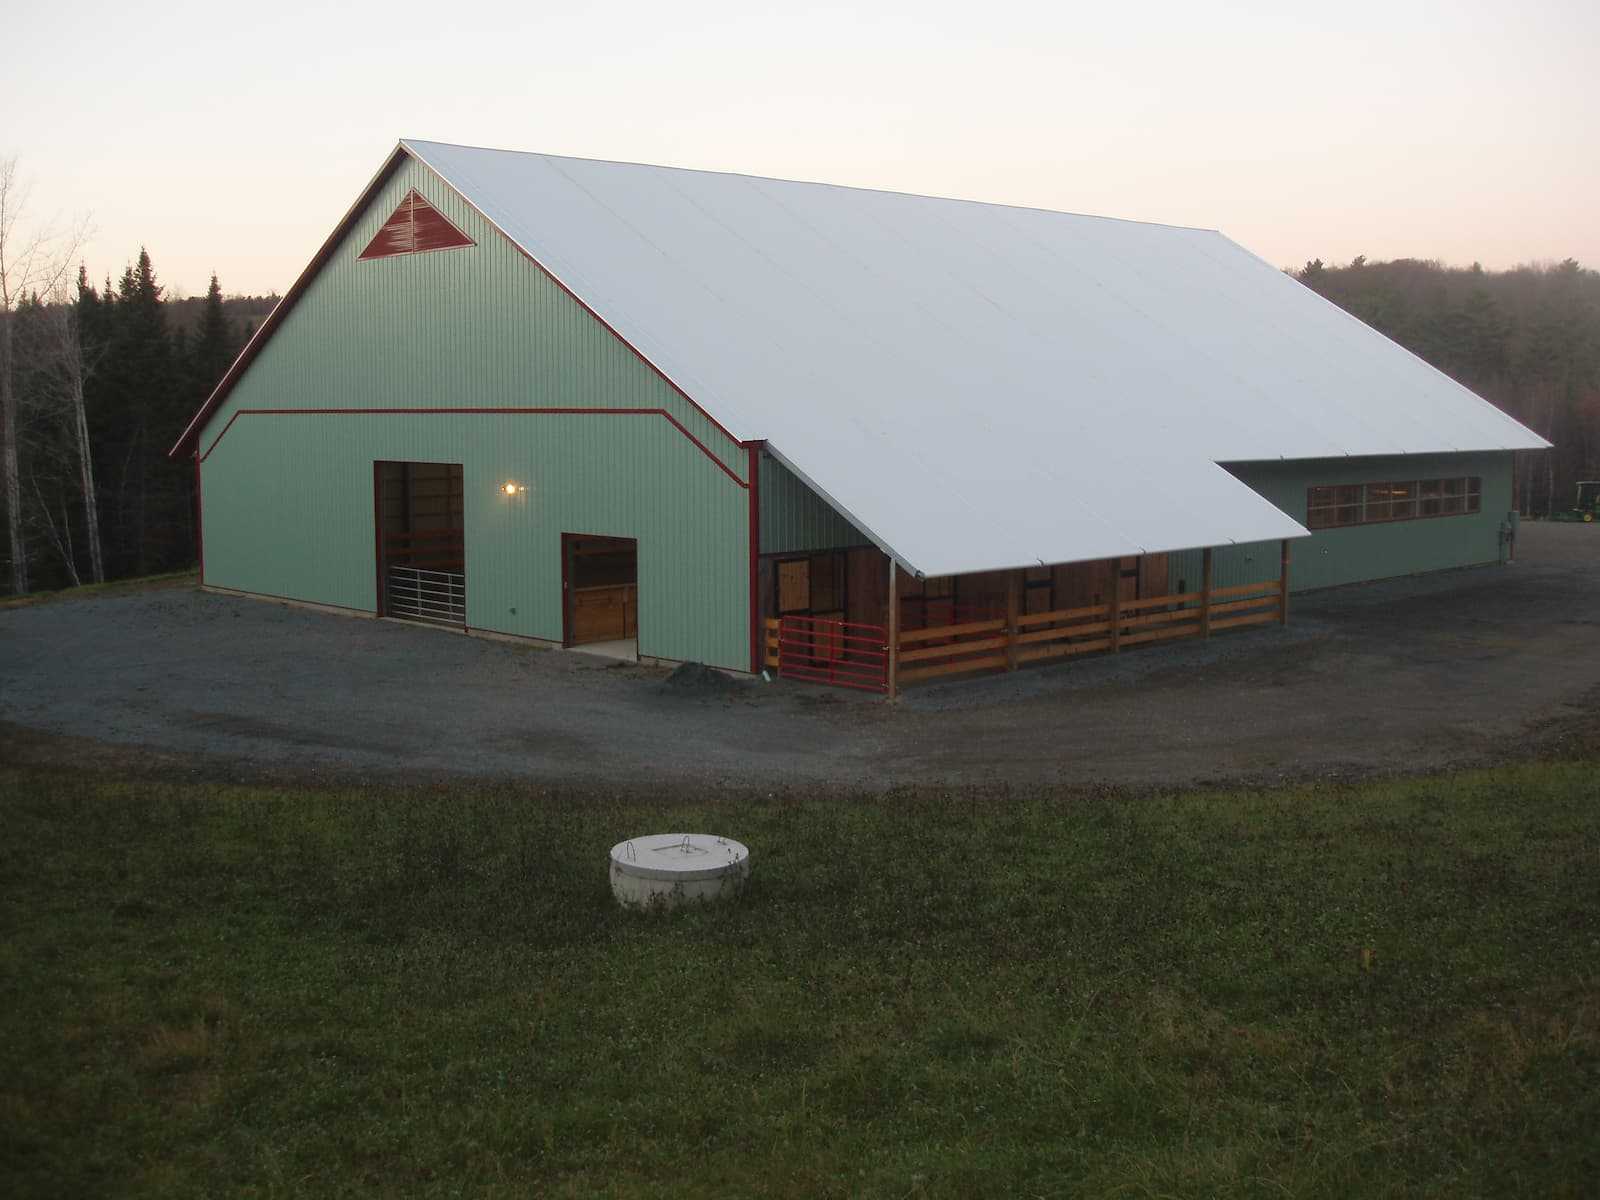 Exterior of a 85’ x 120’ fabric roof riding arena.